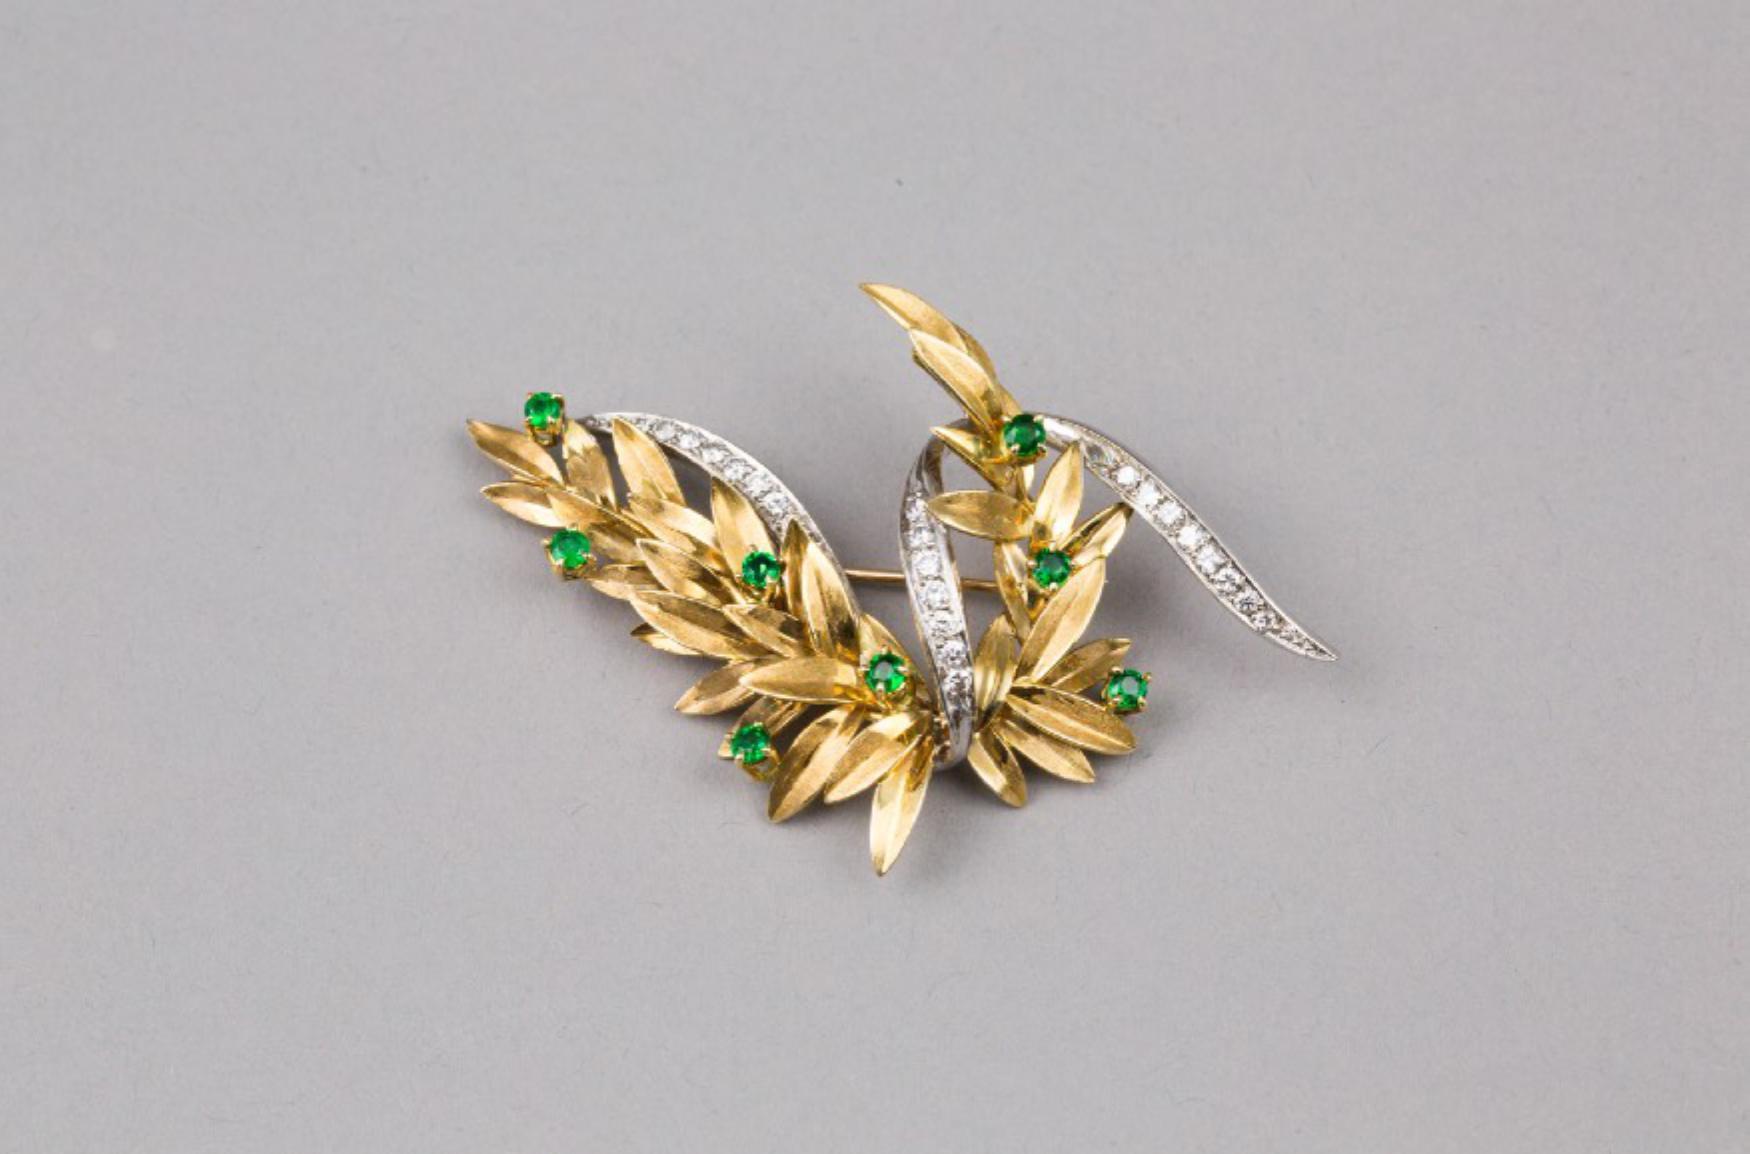 A 18K Yellow Gold Emerald and Diamond brooch